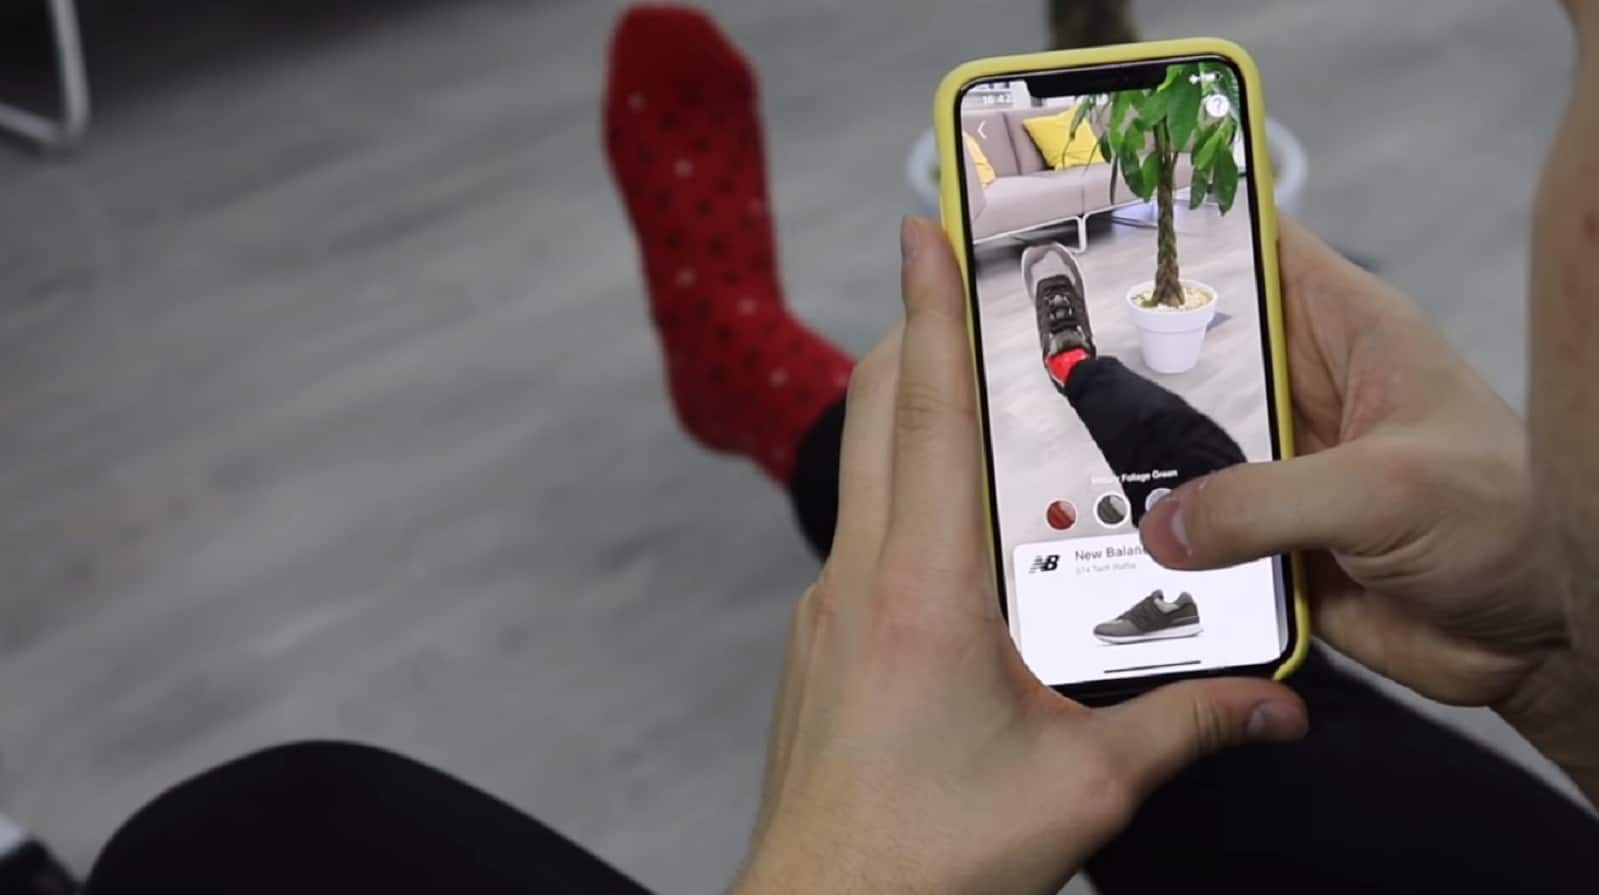 Wannaby’s App Allows Consumers To Virtually Try On Items